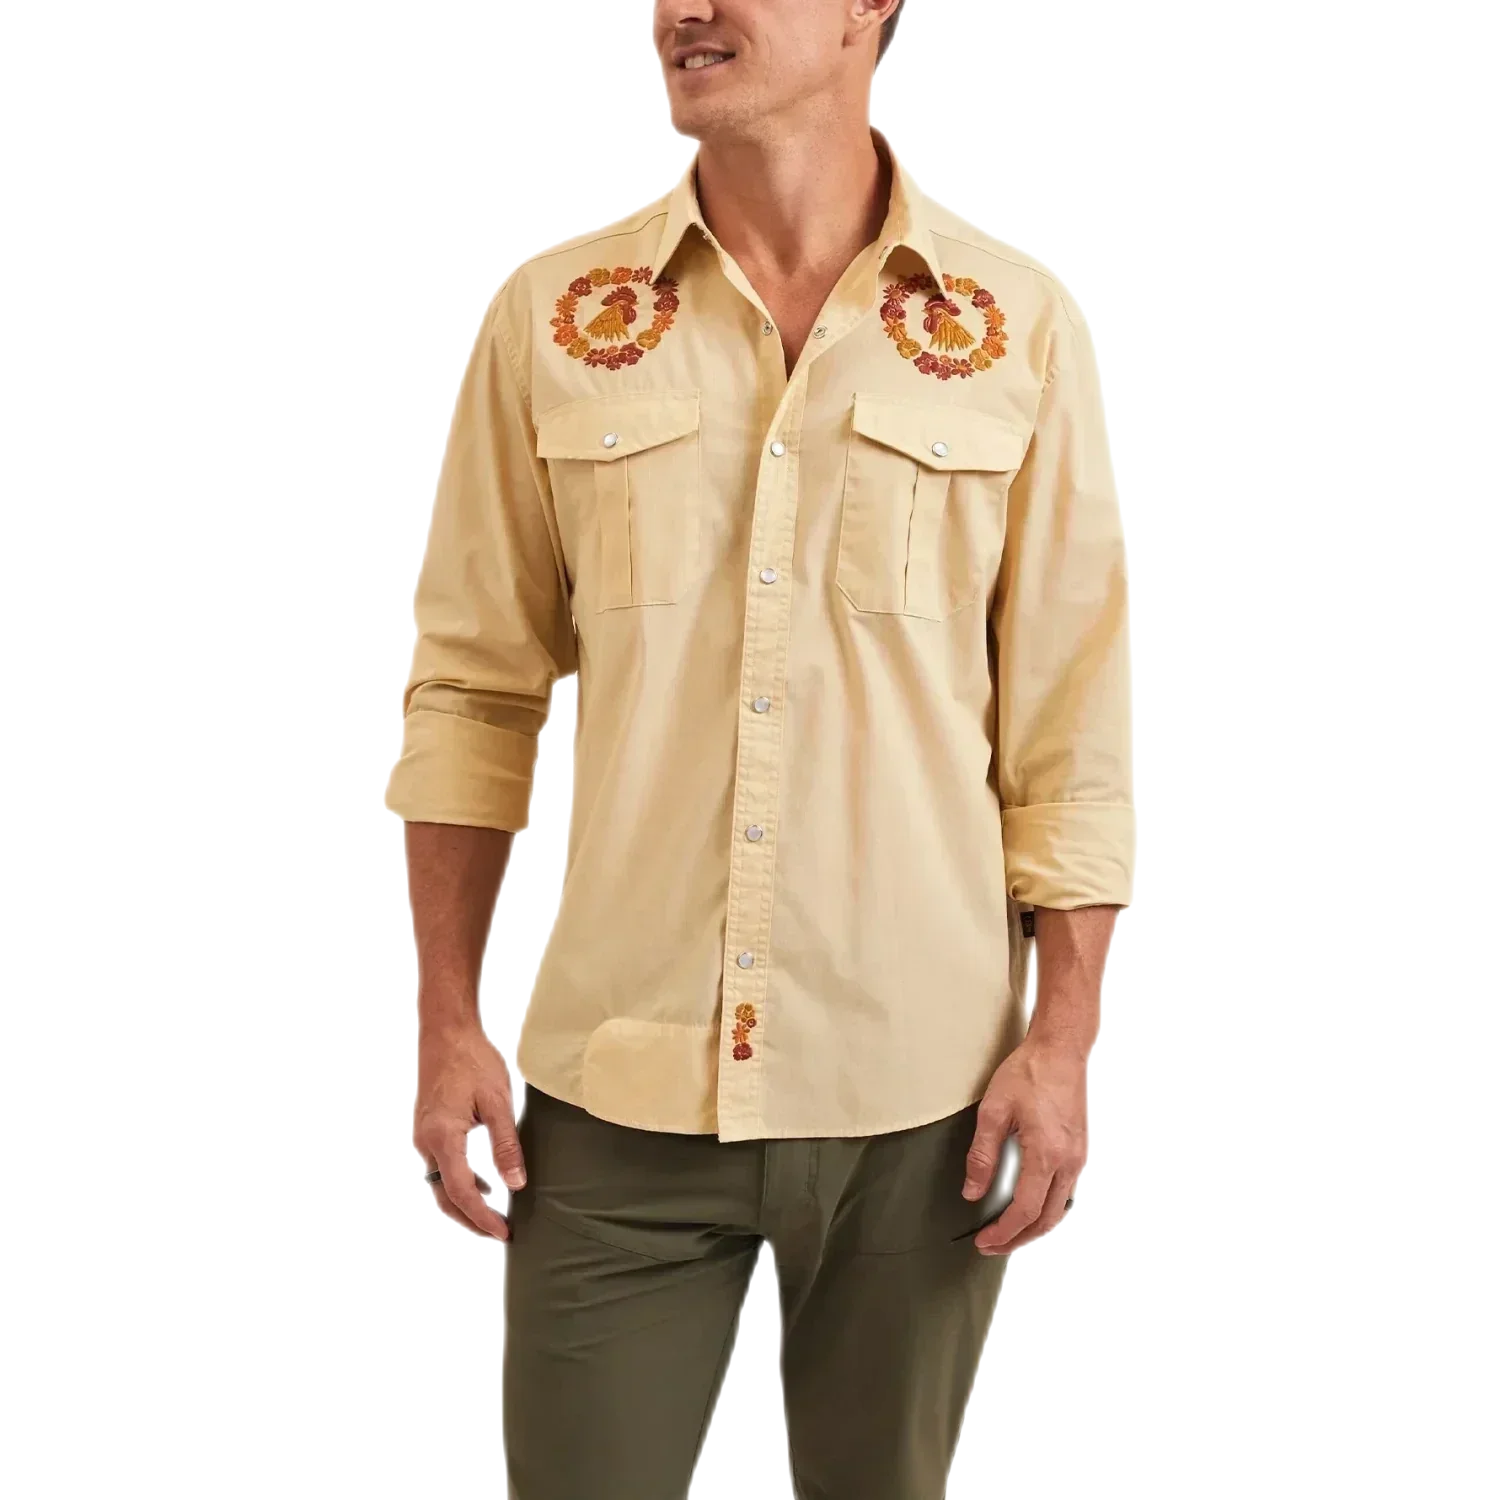 Howler Bros 01. MENS APPAREL - MENS LS SHIRTS - MENS LS BUTTON UP Men's Gaucho Snapshirt RING AROUND THE ROOSTER